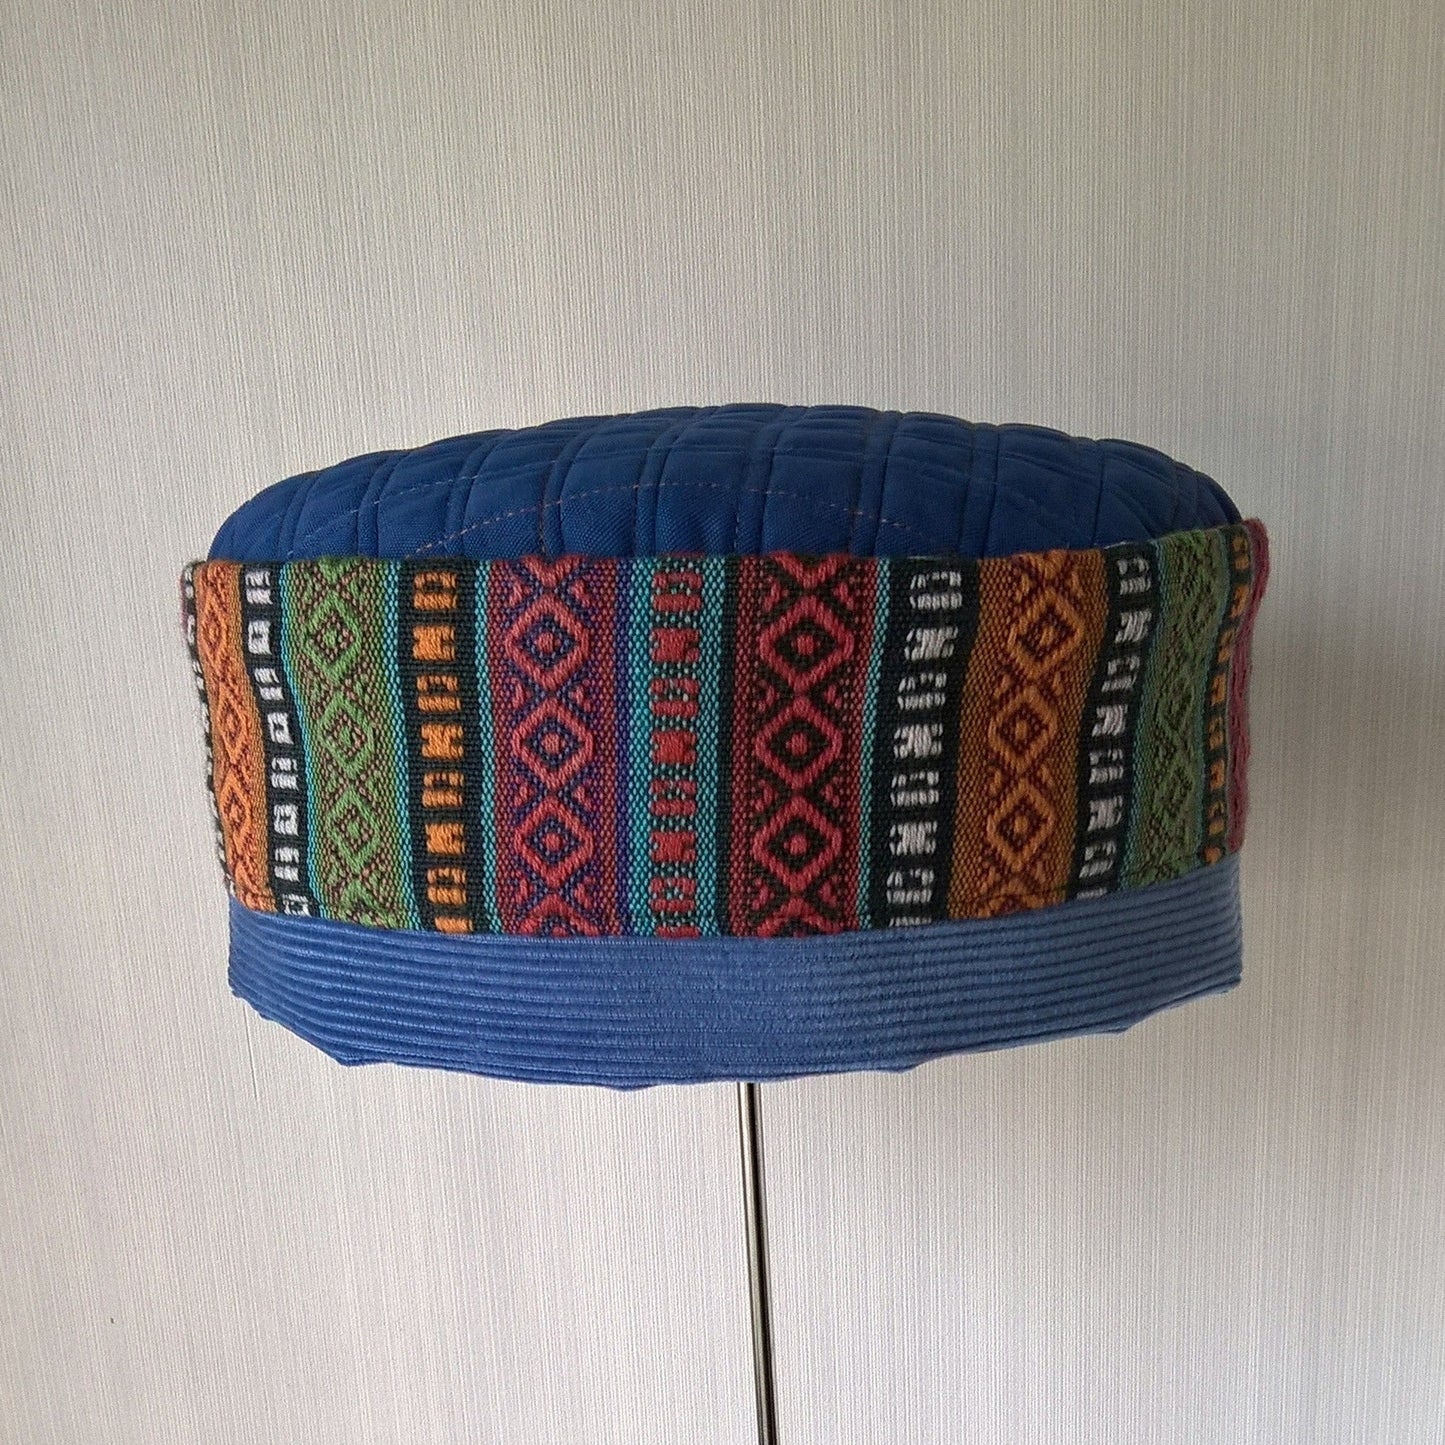 Blue brimless hat with bright multi coloured ethnic crown